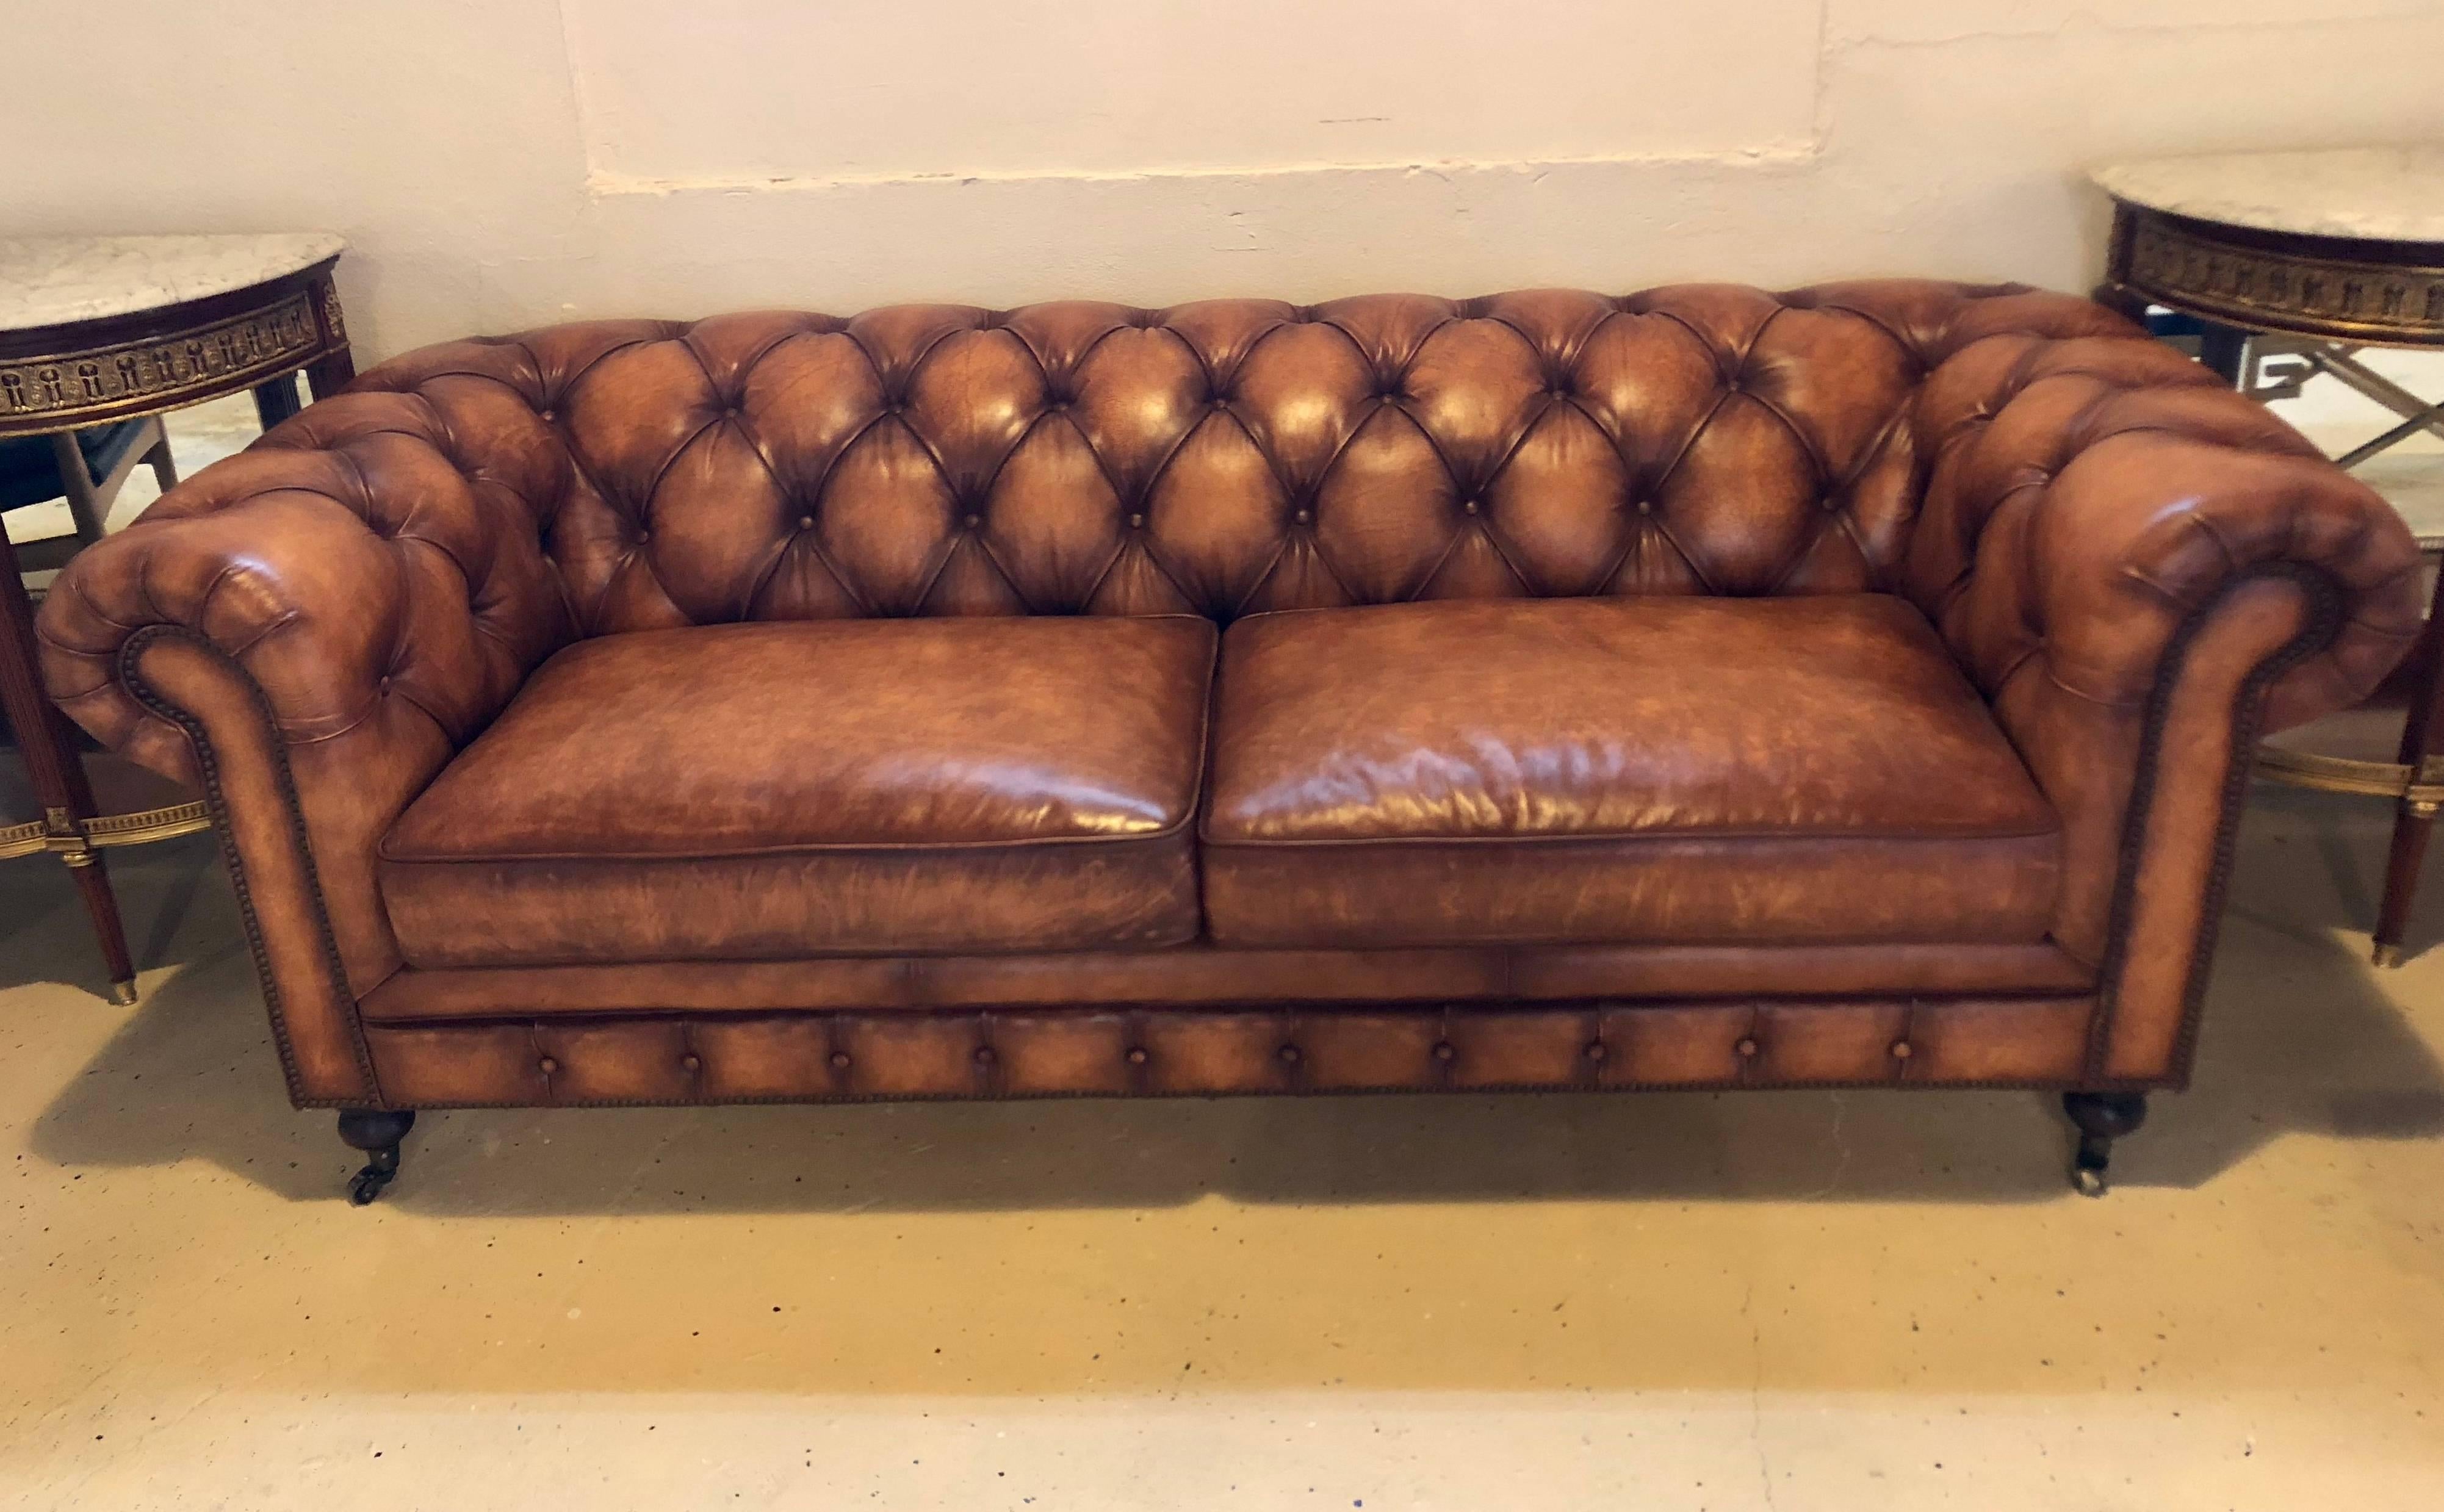 An English worn leather Chesterfield sofa. Supported by bun feet on brass casters stands this very comfortable sofa in a fine worn leather.